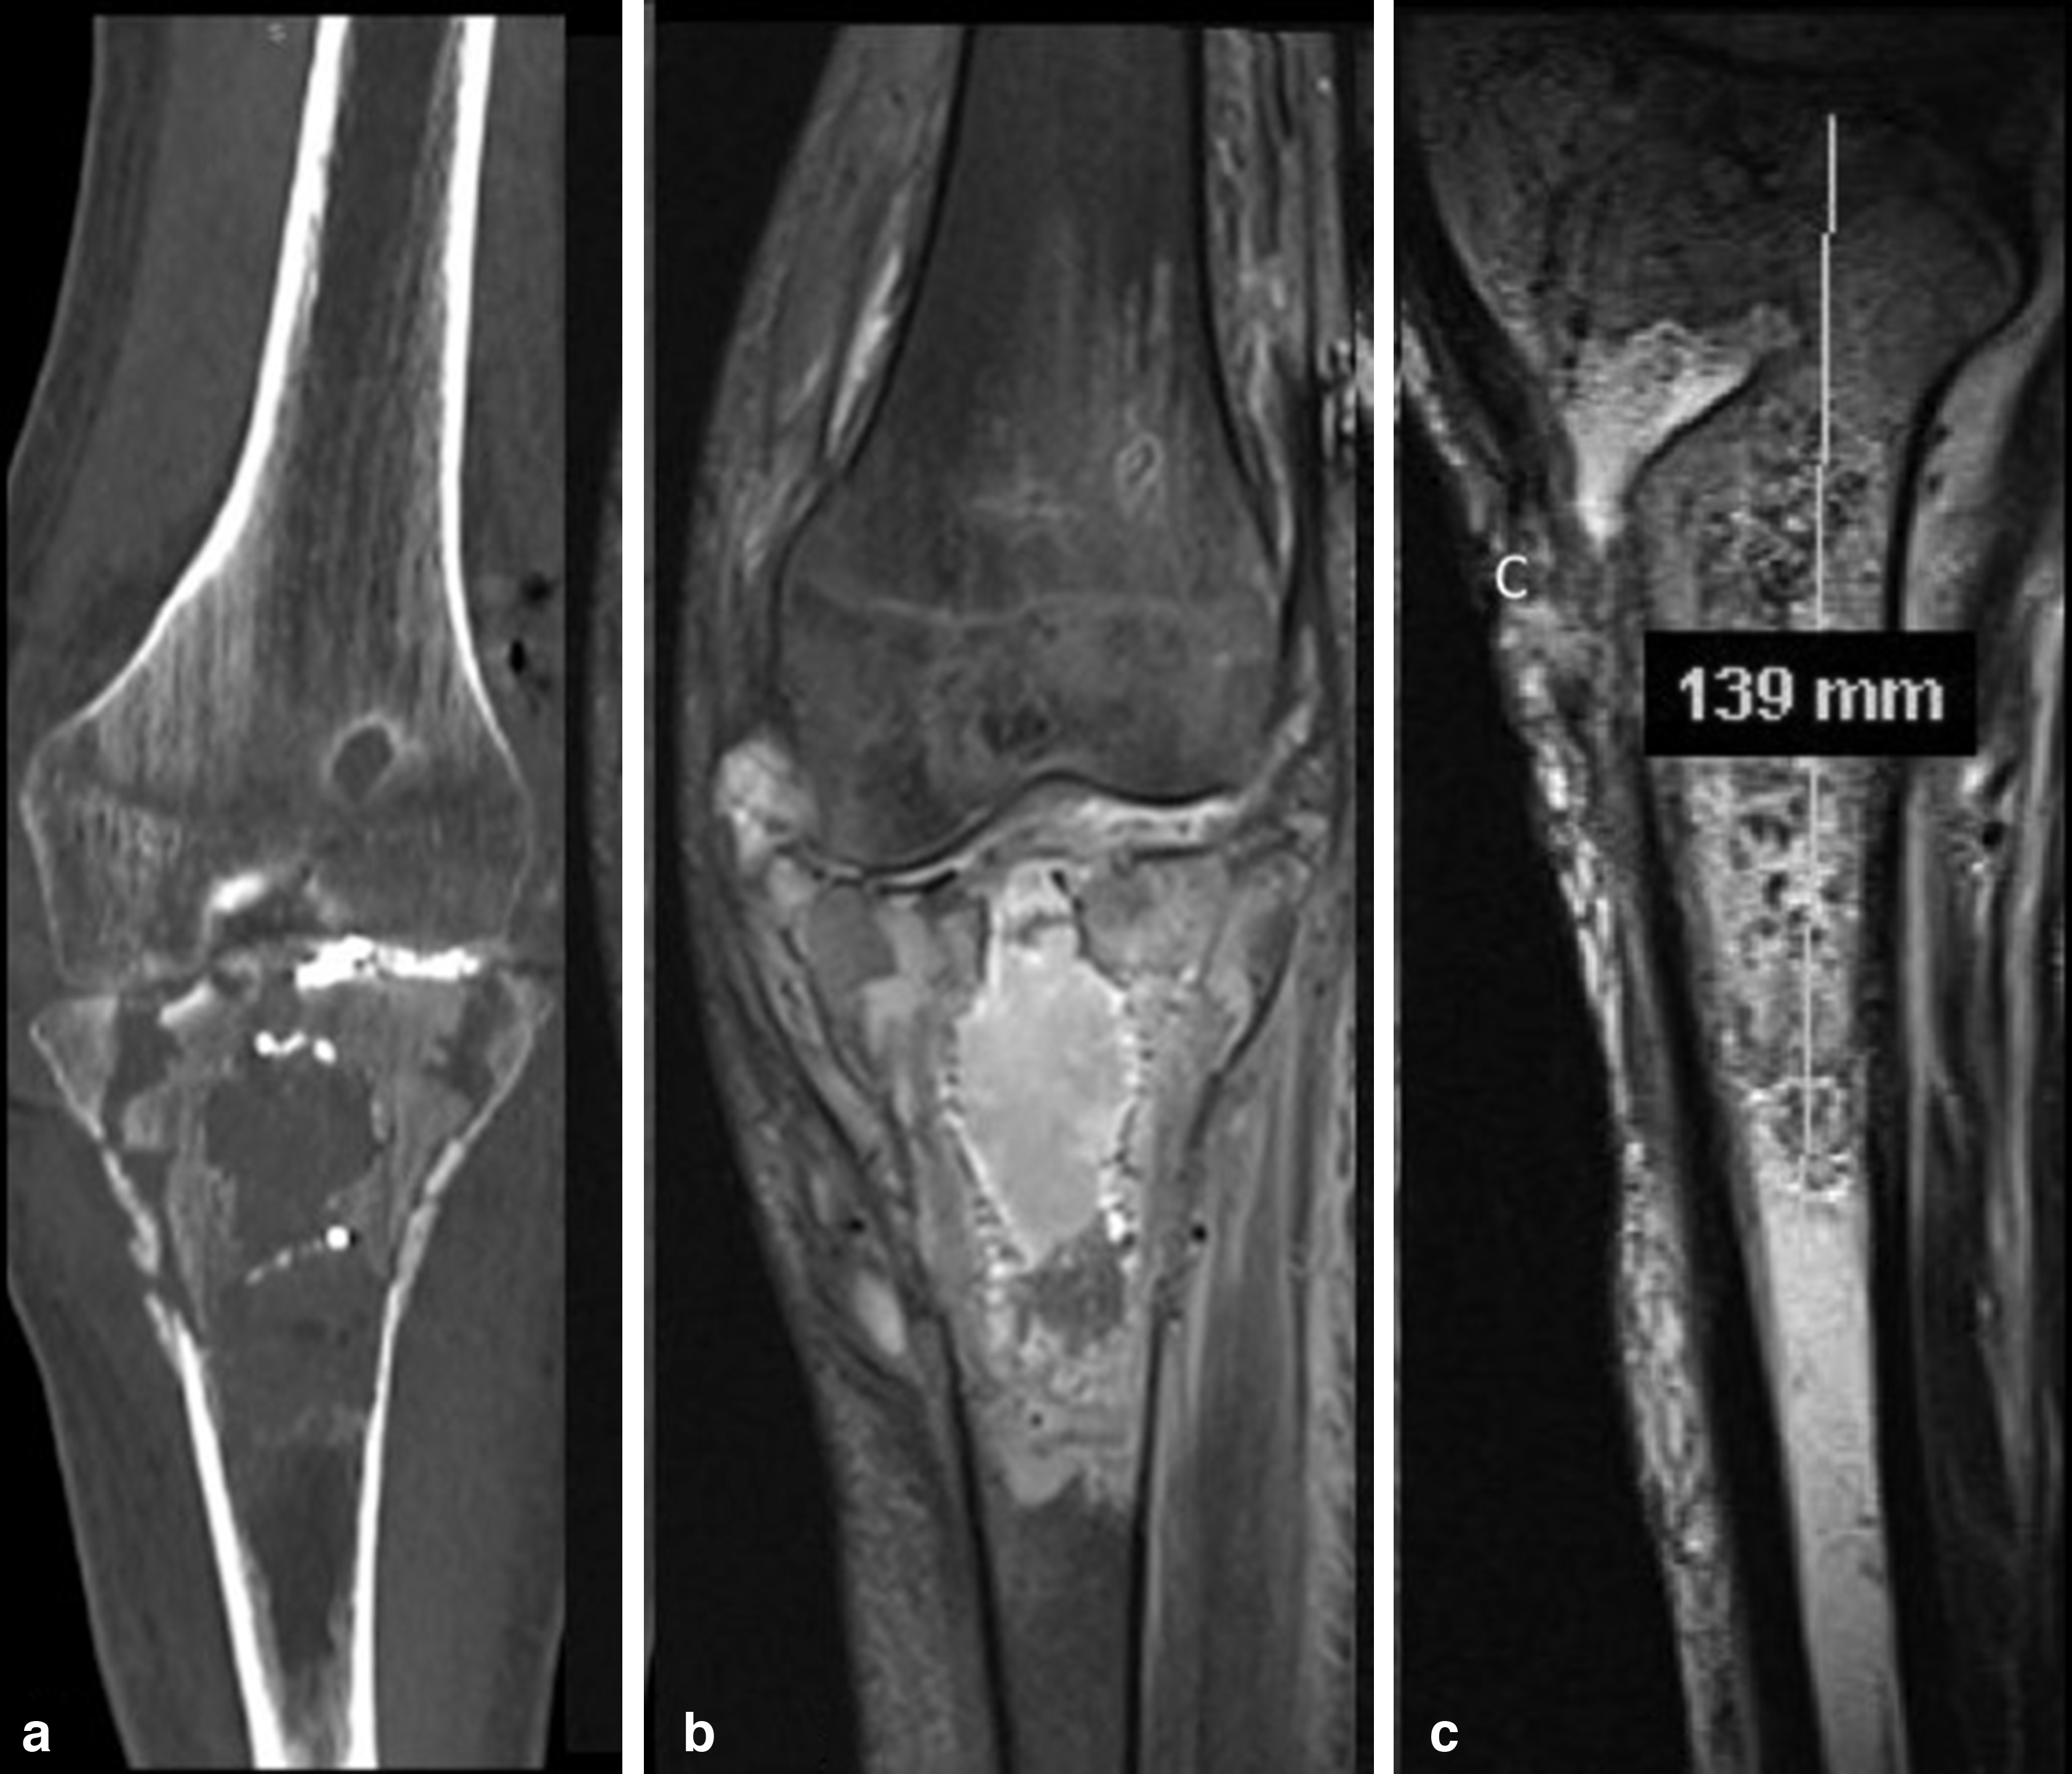 Fig. 2 
          MRI and CT scan images of a 52-year-old male patient show bone and soft tissue compromises at 75-day follow-up. a) A CT scan shows intracavitary and medial cortex lesion of the proximal tibia. b) MRI coronal views show a central cavitary lesion of the proximal tibia surrounded of bone oedema and soft tissue compromise. c) MRI sagittal view, showing the tibial tunnel of the primary anterior cruciate ligament surgery, and a massive bone lesion of 139 mm.
        